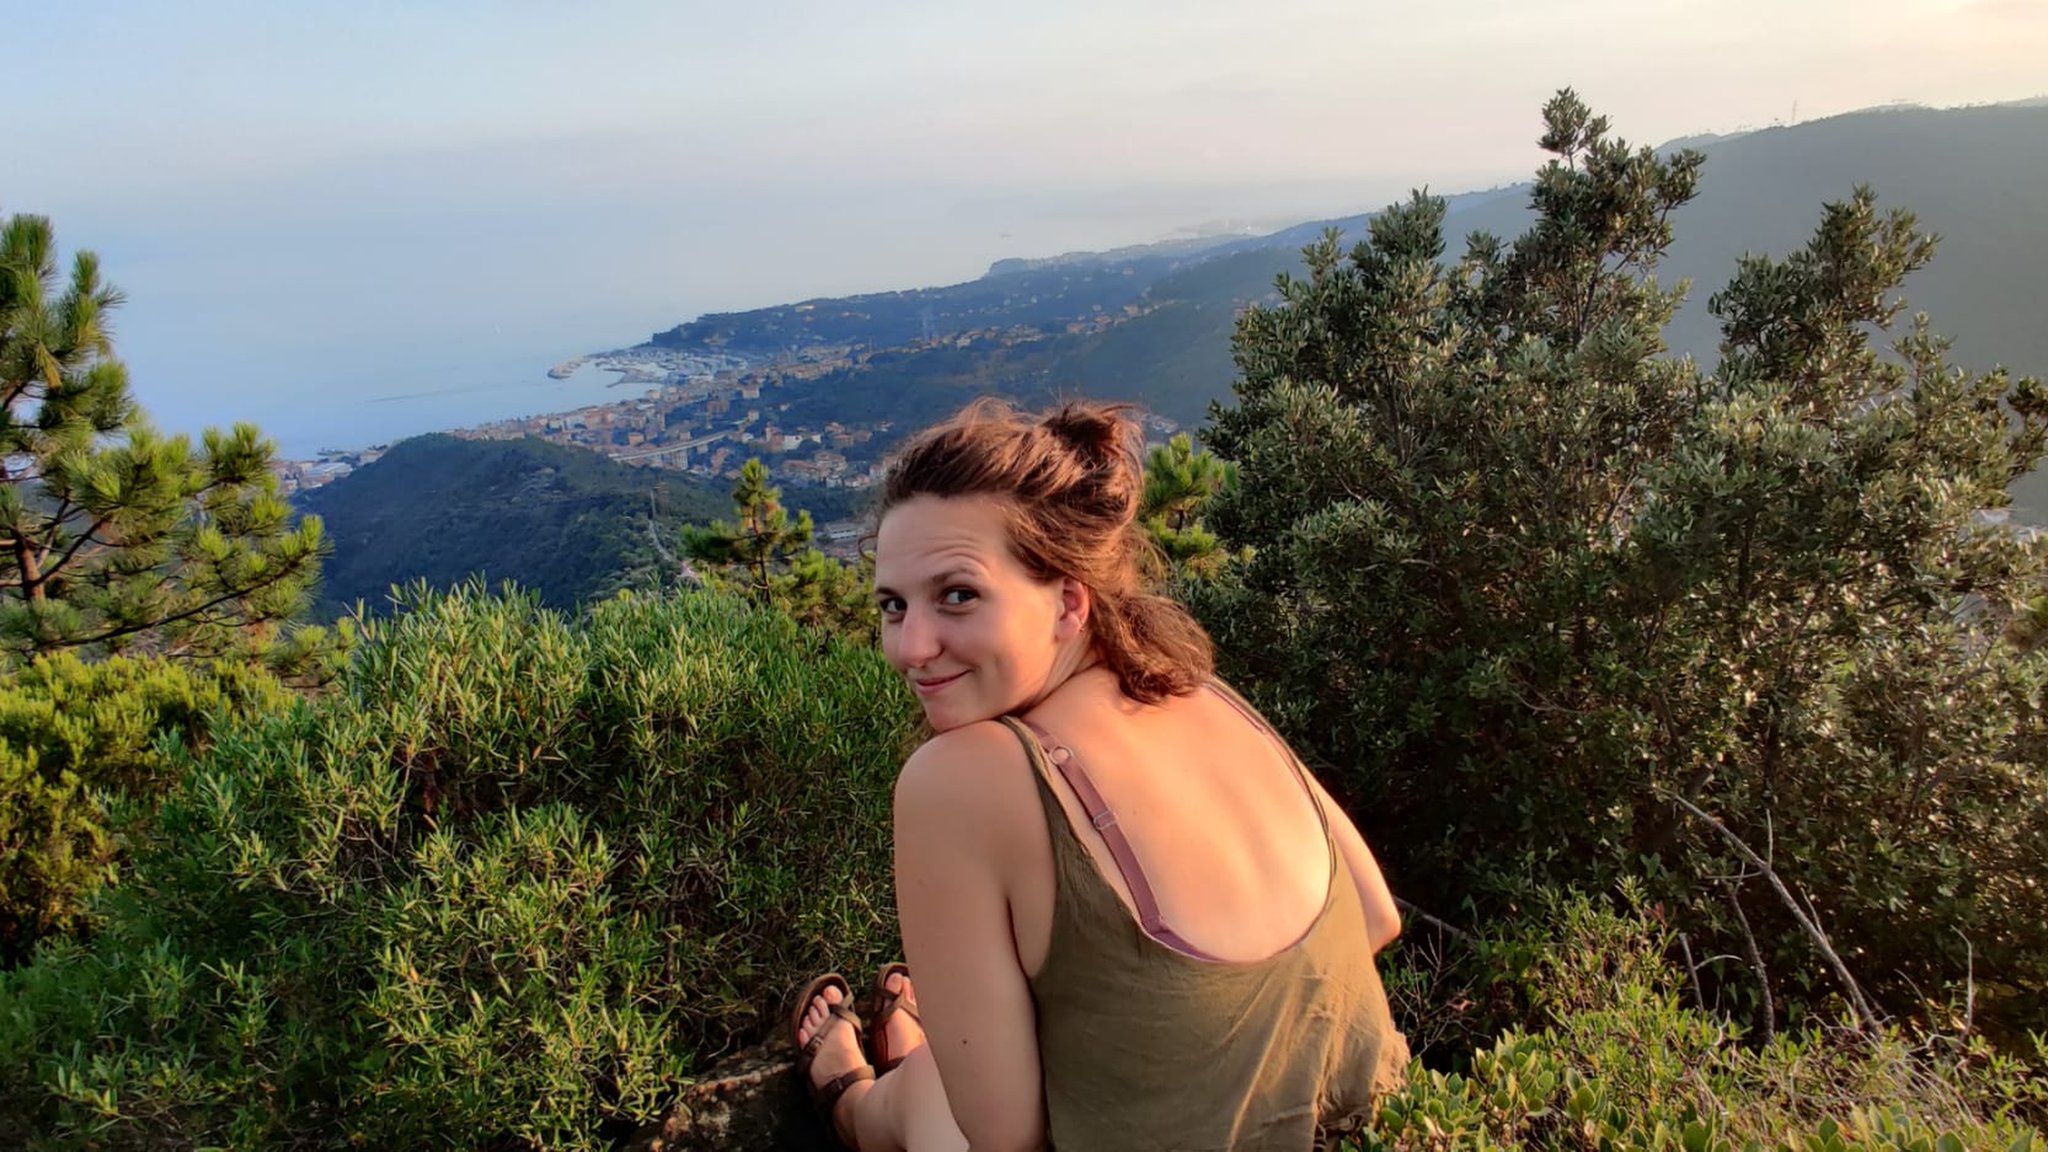 Megan Morgan sitting on a mountain, looking over her shoulder at the camera. In the distance you can see shrubbery and the sea.